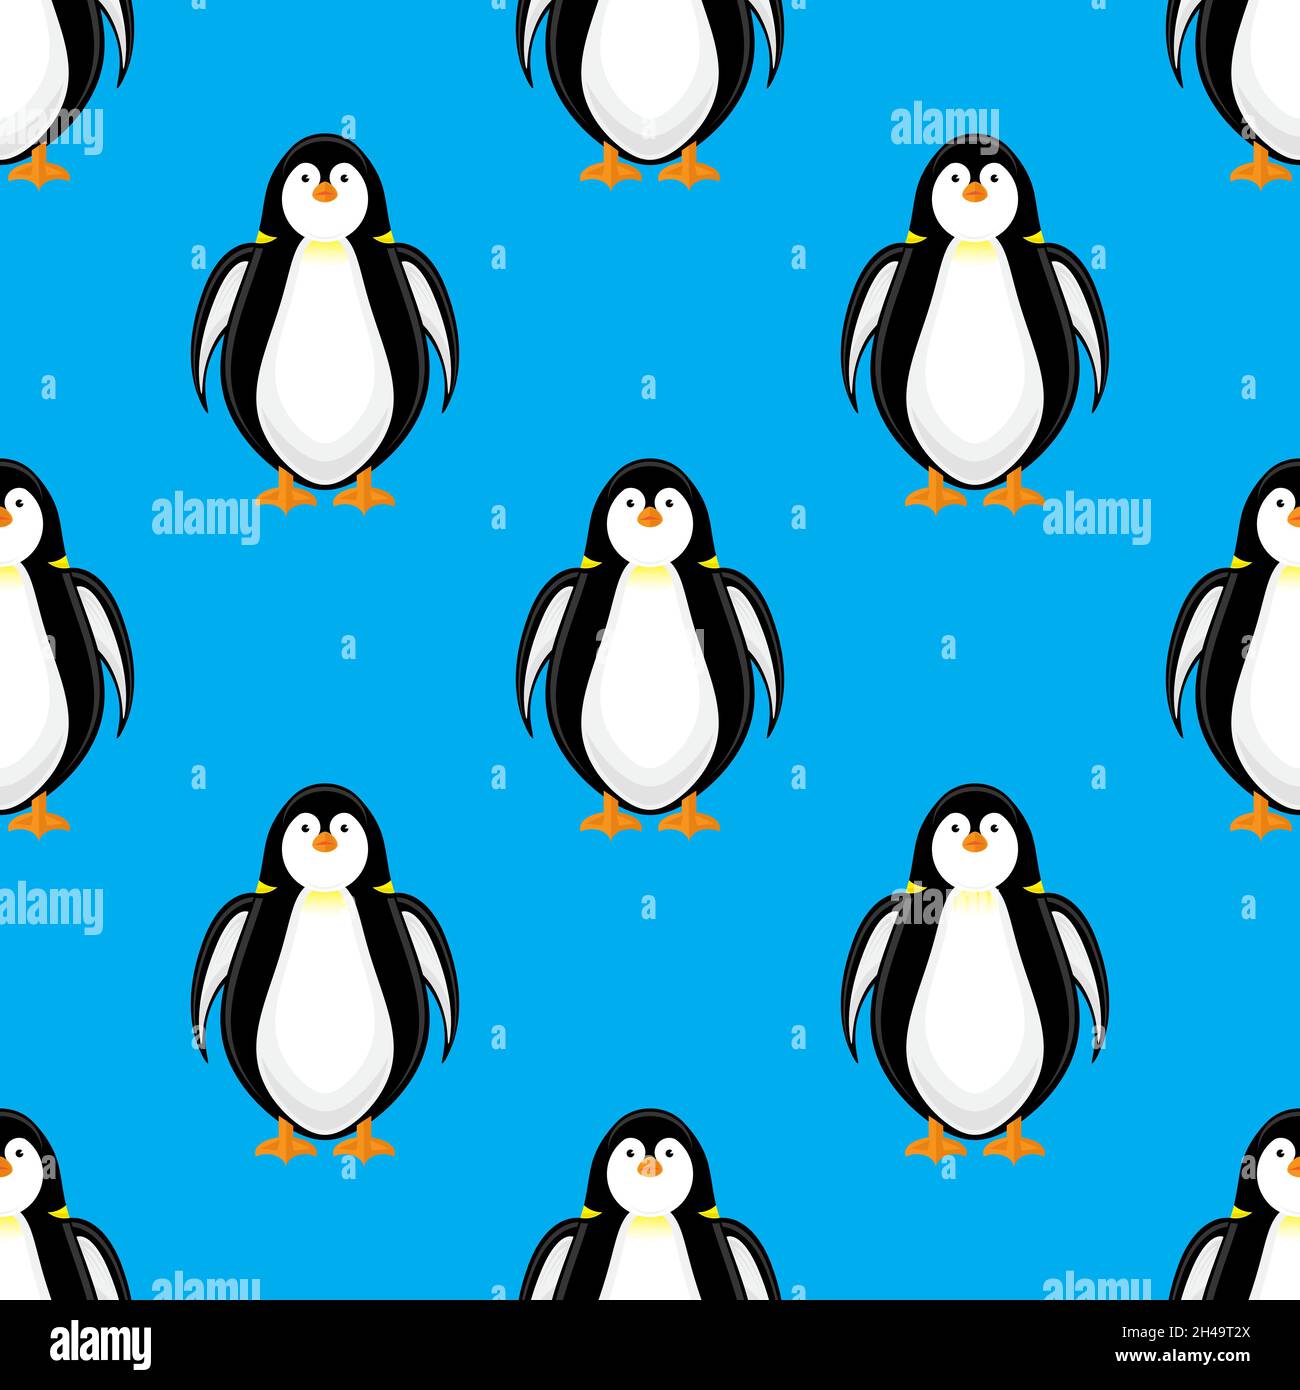 Cute Penguin Icon Isolated on Blue Background. Seamless Pattern Stock Vector